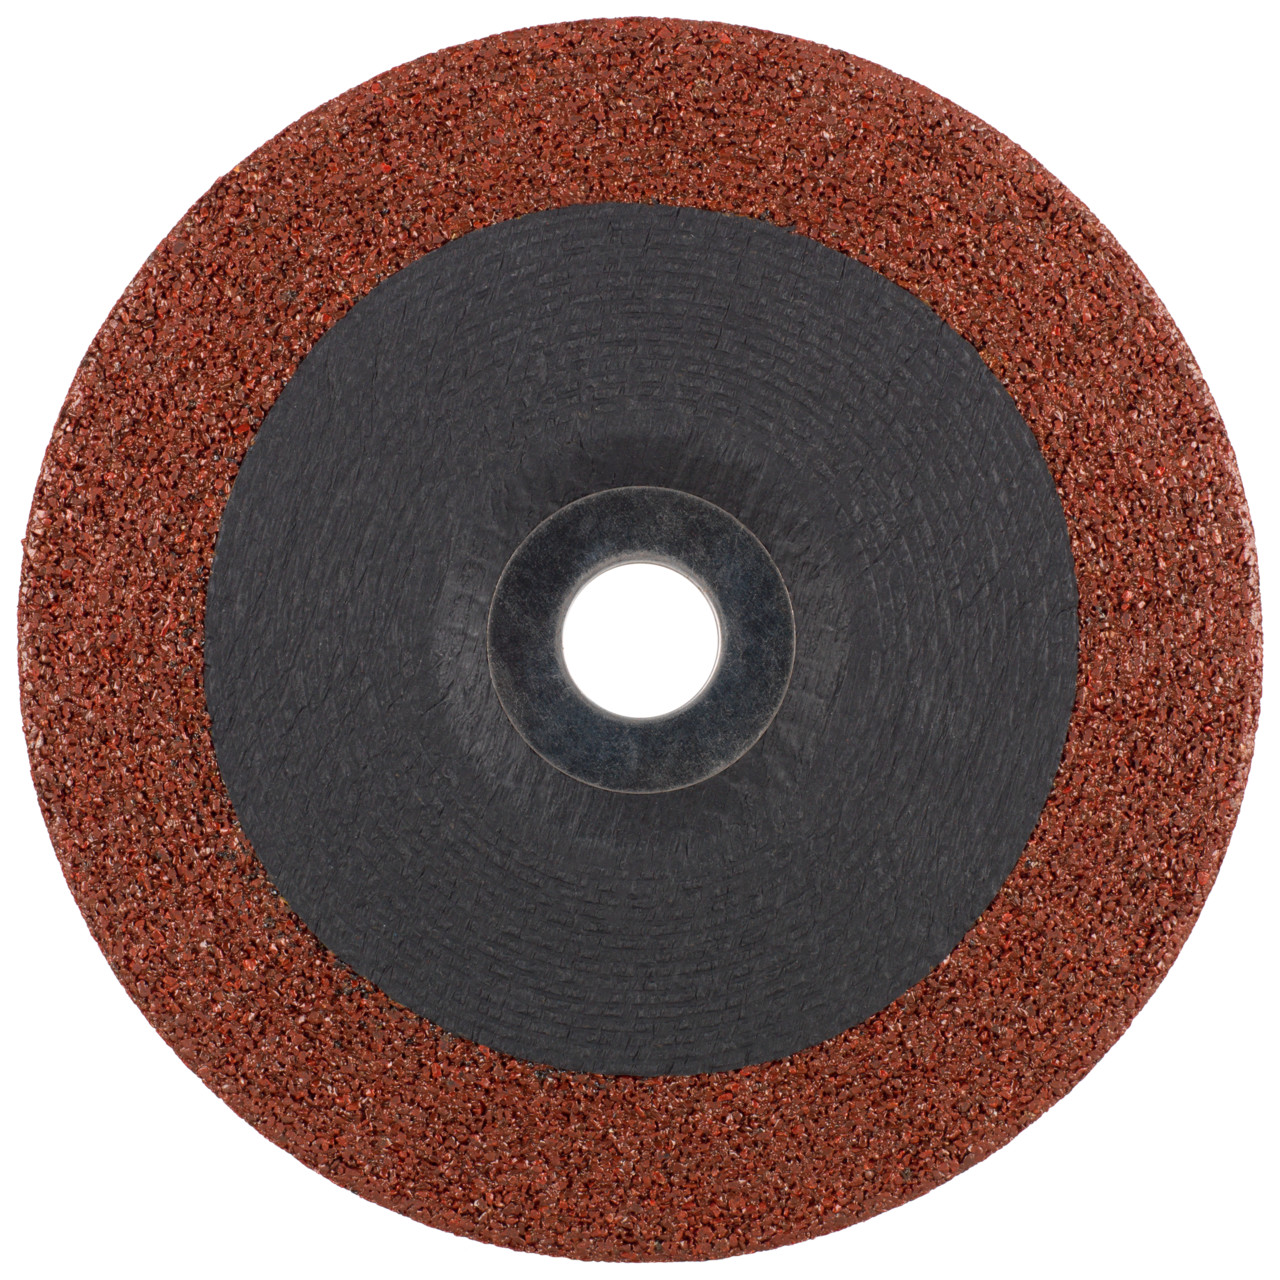 TYROLIT grinding disc DxUxH 230x7x22.23 3in1 for steel and stainless steel and cast iron, shape: 27 - offset version, Art. 466762